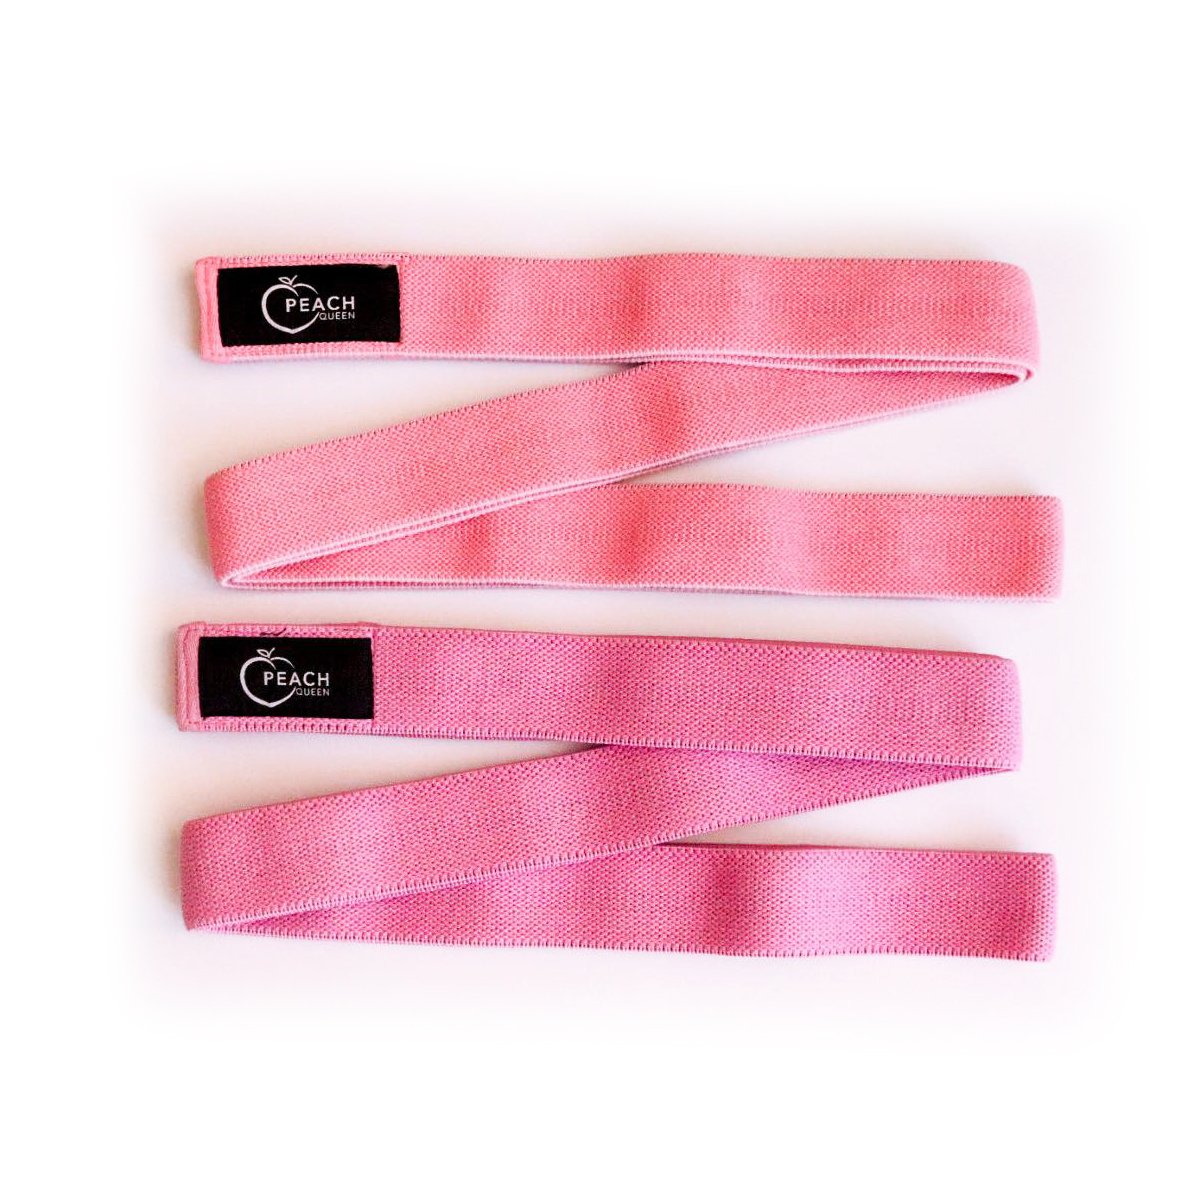 Pink items: fabric bands for workout